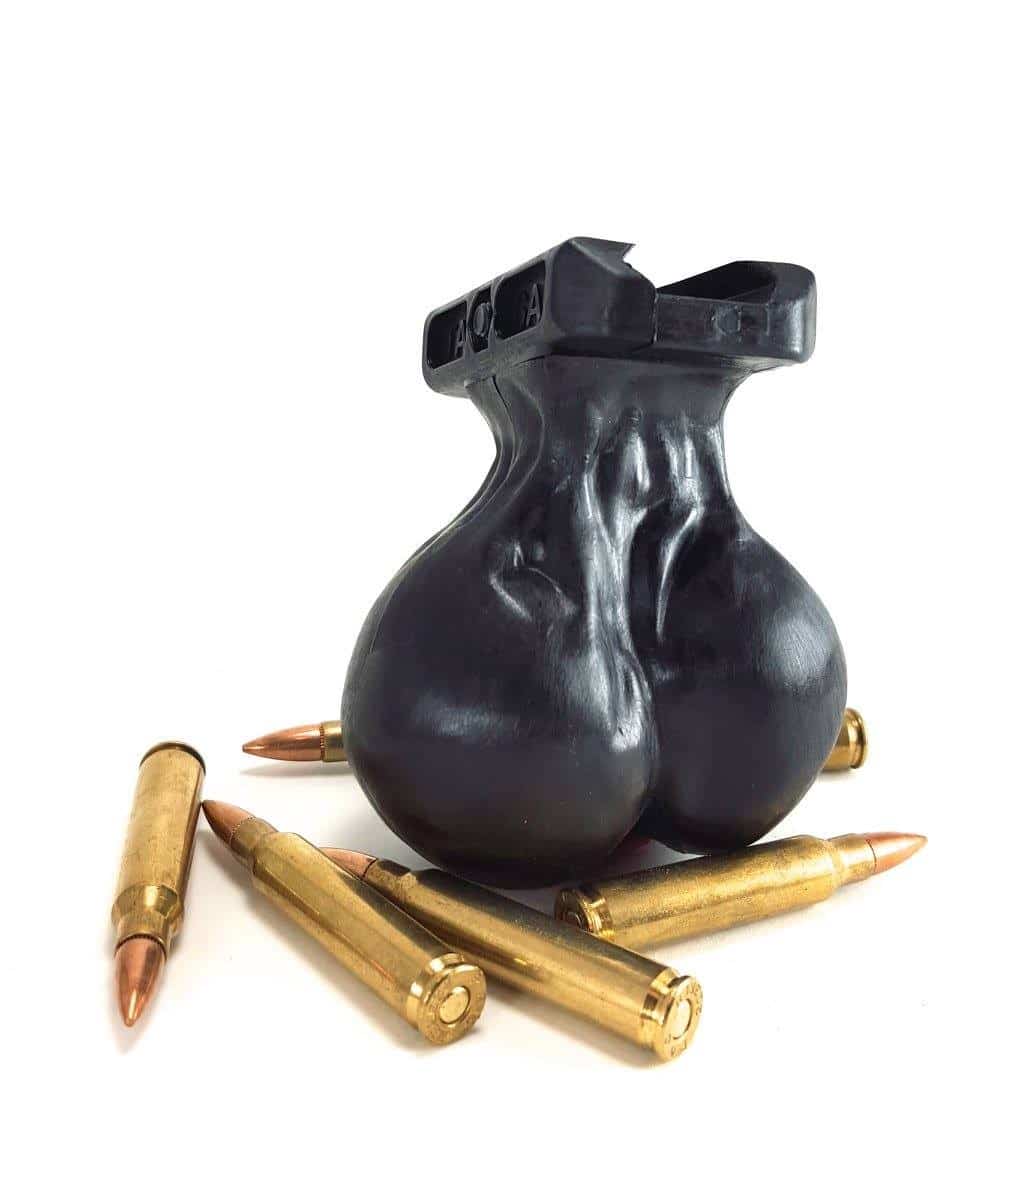 Tactical Sack Grip for 20mm rails